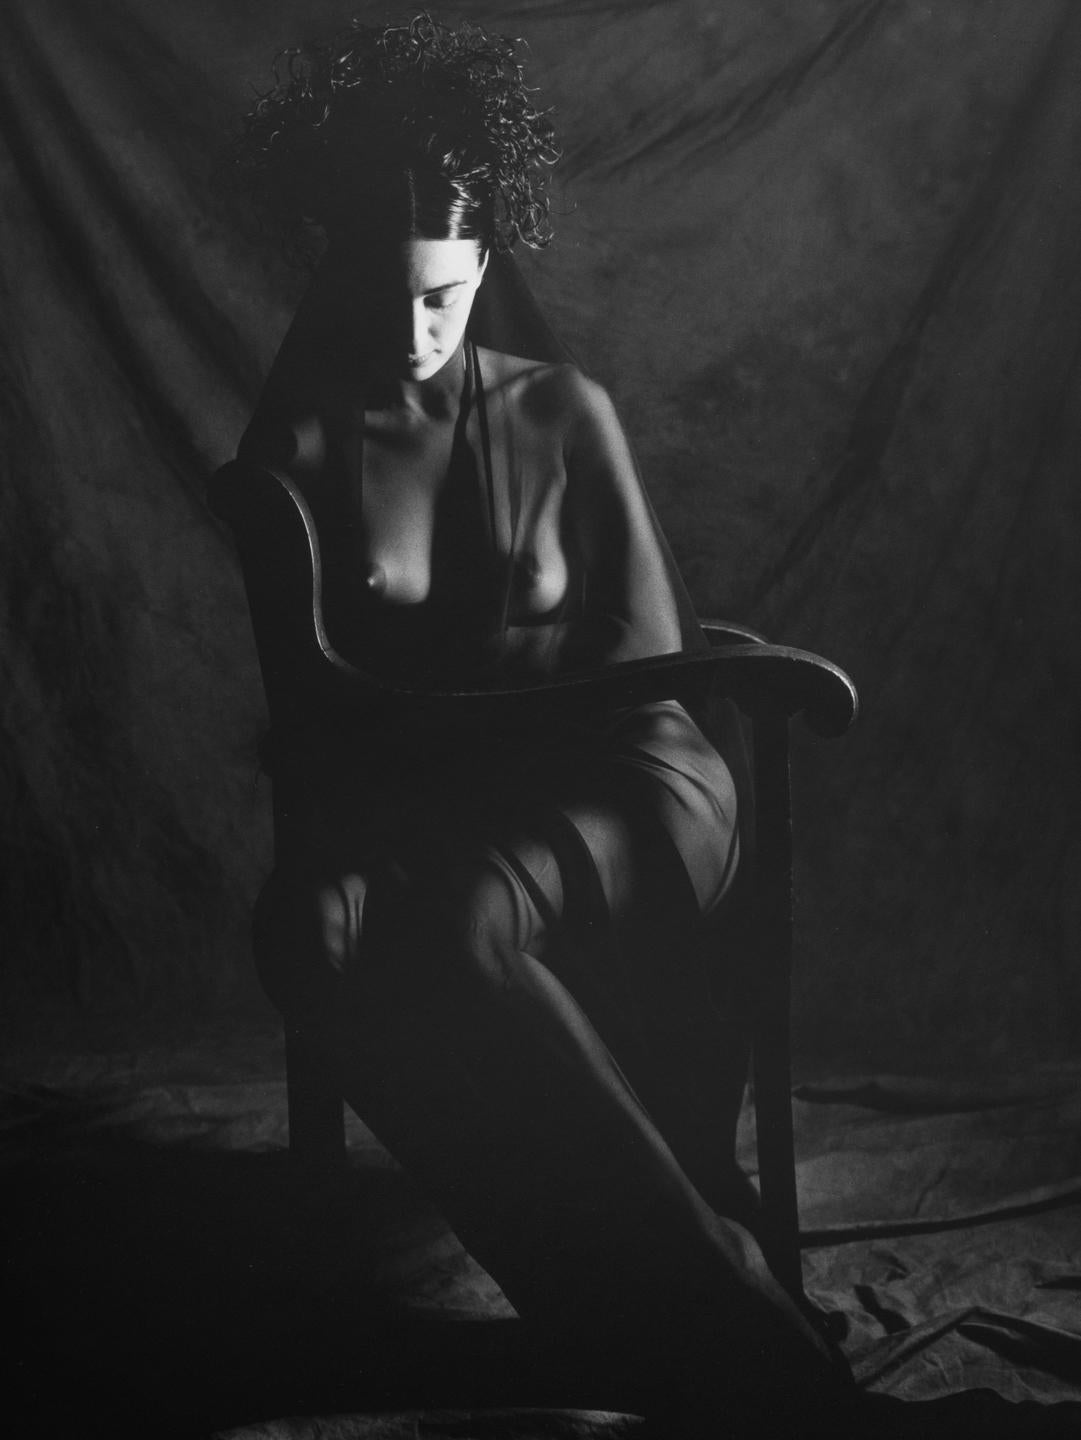 Doug Birkenheuer Nude Photograph - Somber Woman, Nude Female, Seated and Veiled, Black and White Photograph